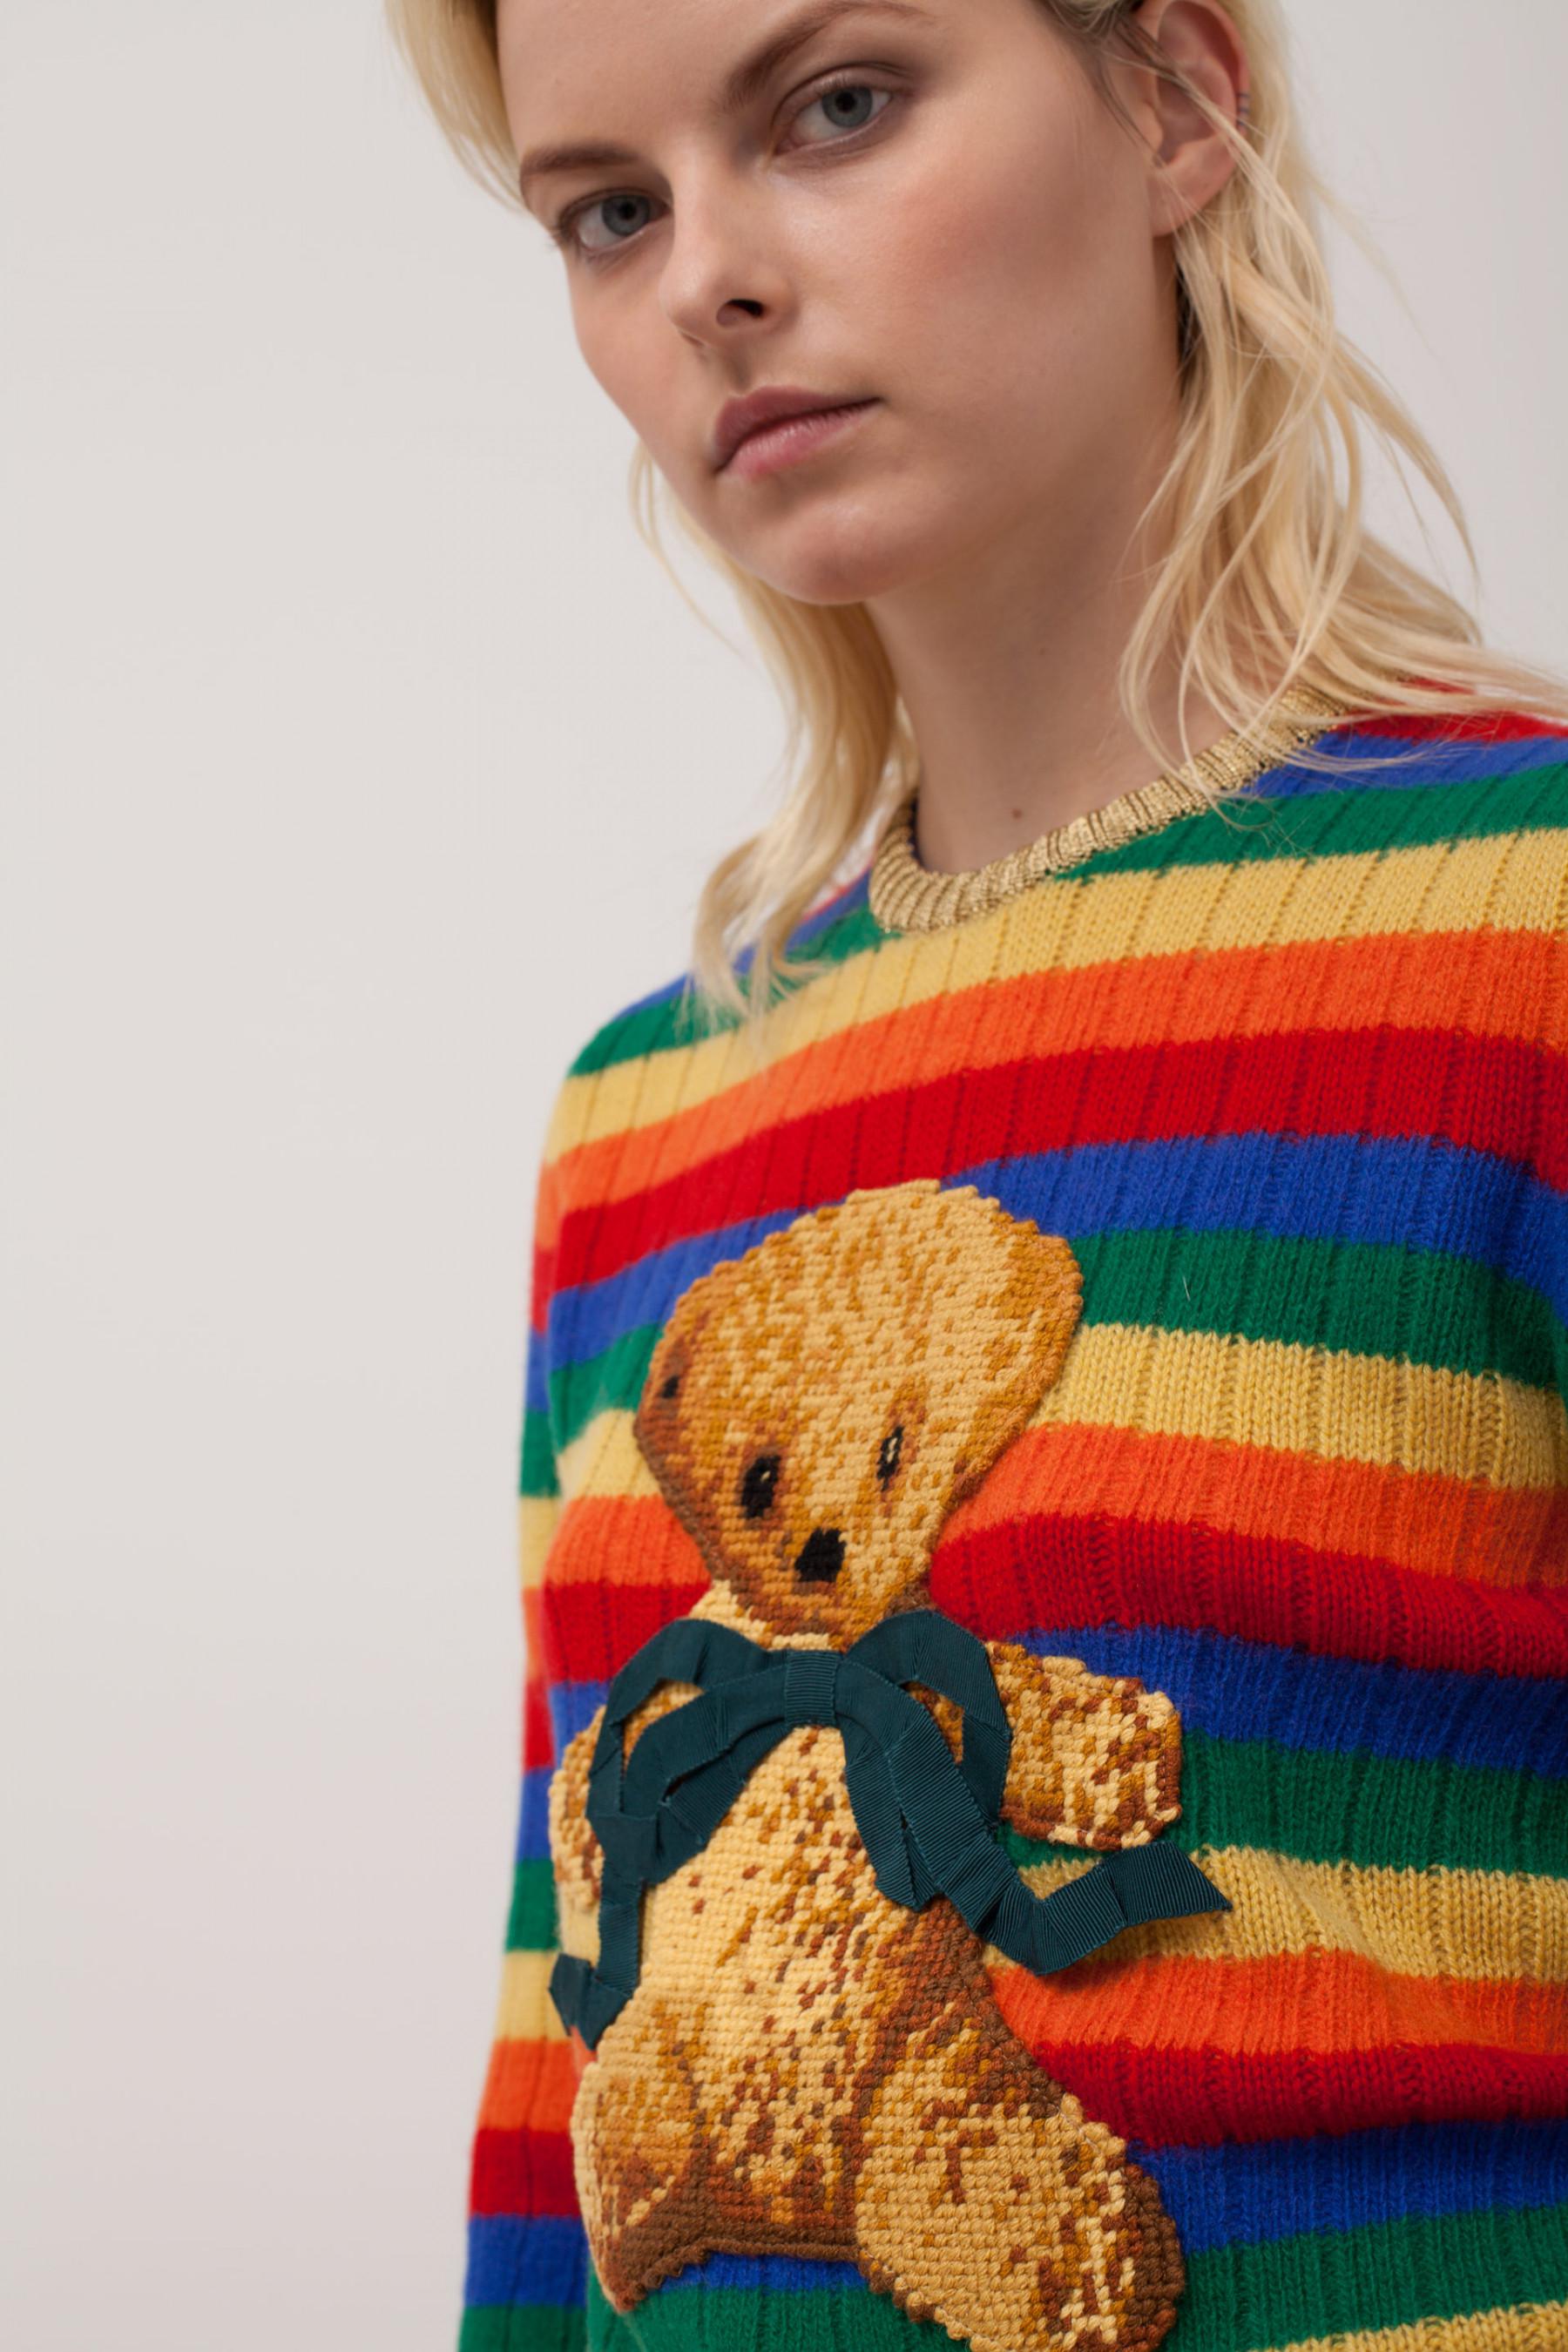 Gucci Teddy Bear Sweater in Red